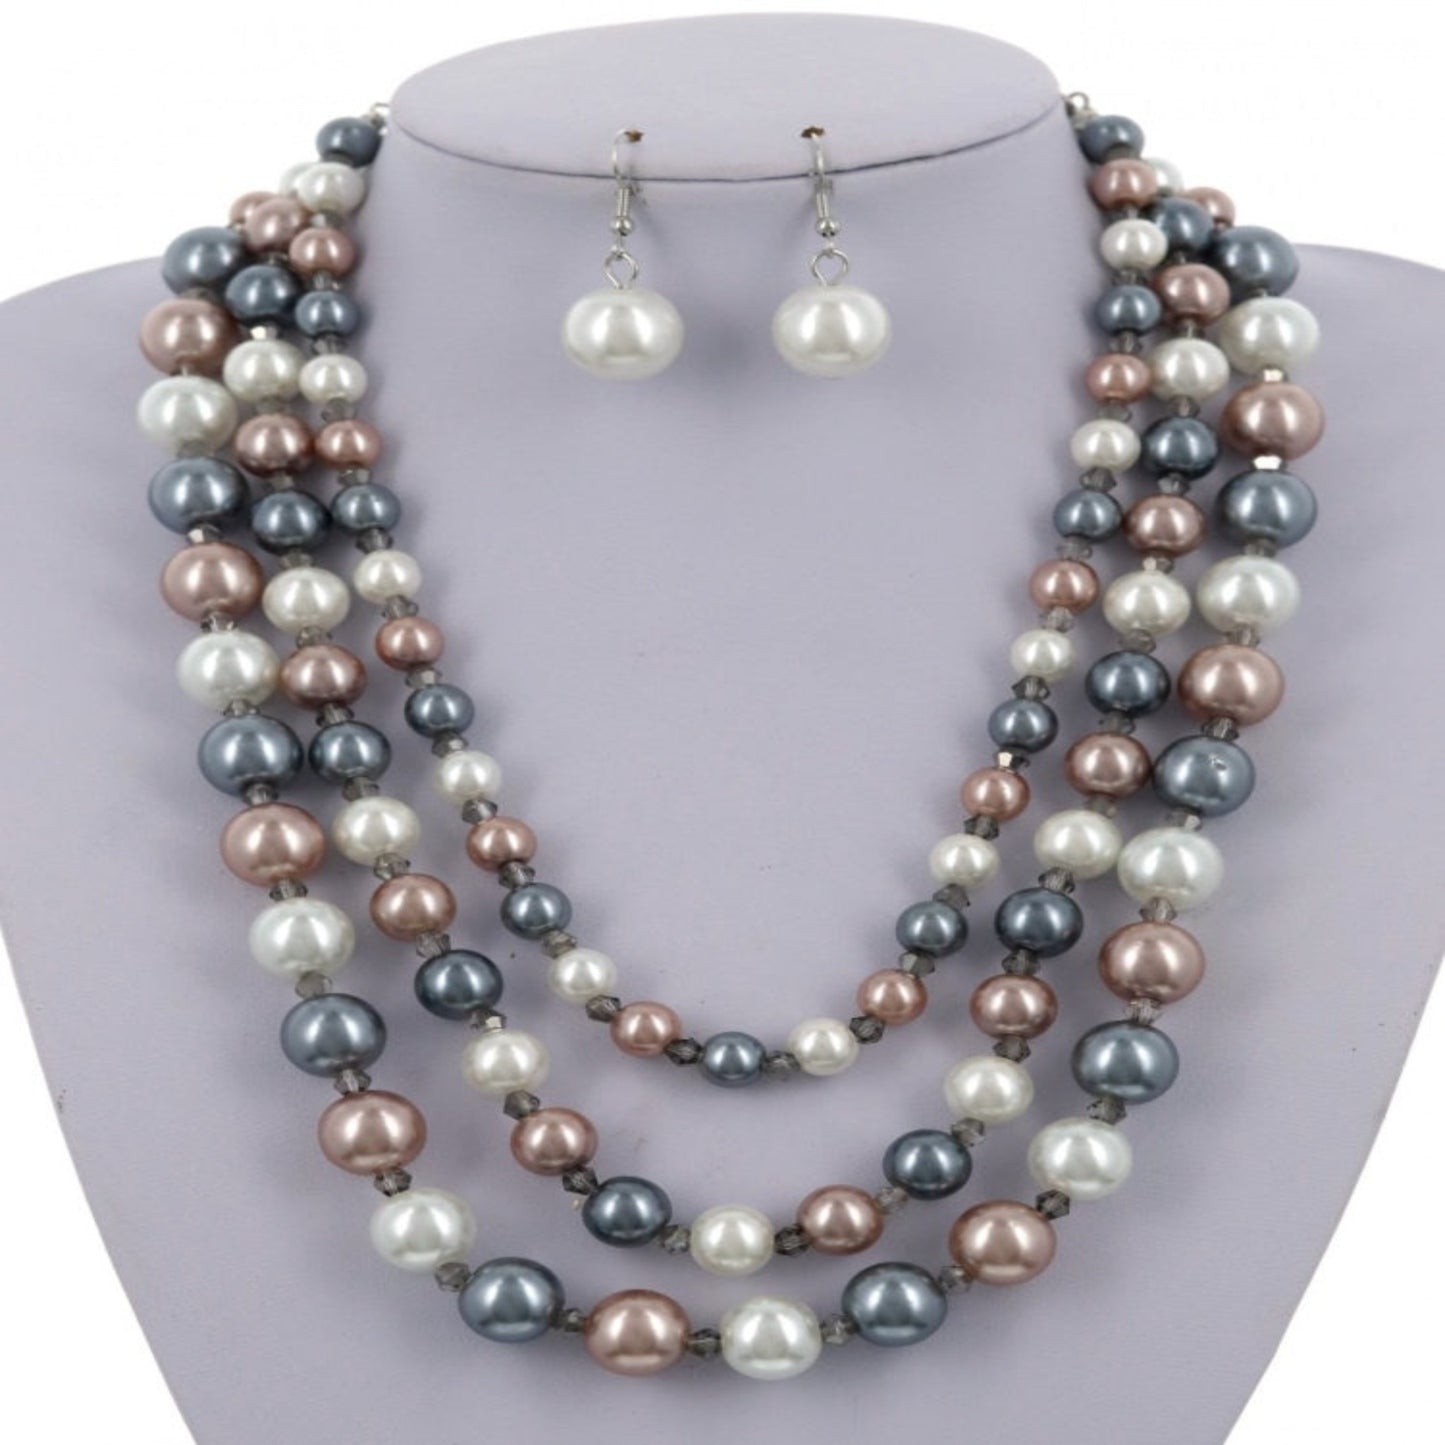 3 Strand Pearl Glass necklace and earring set